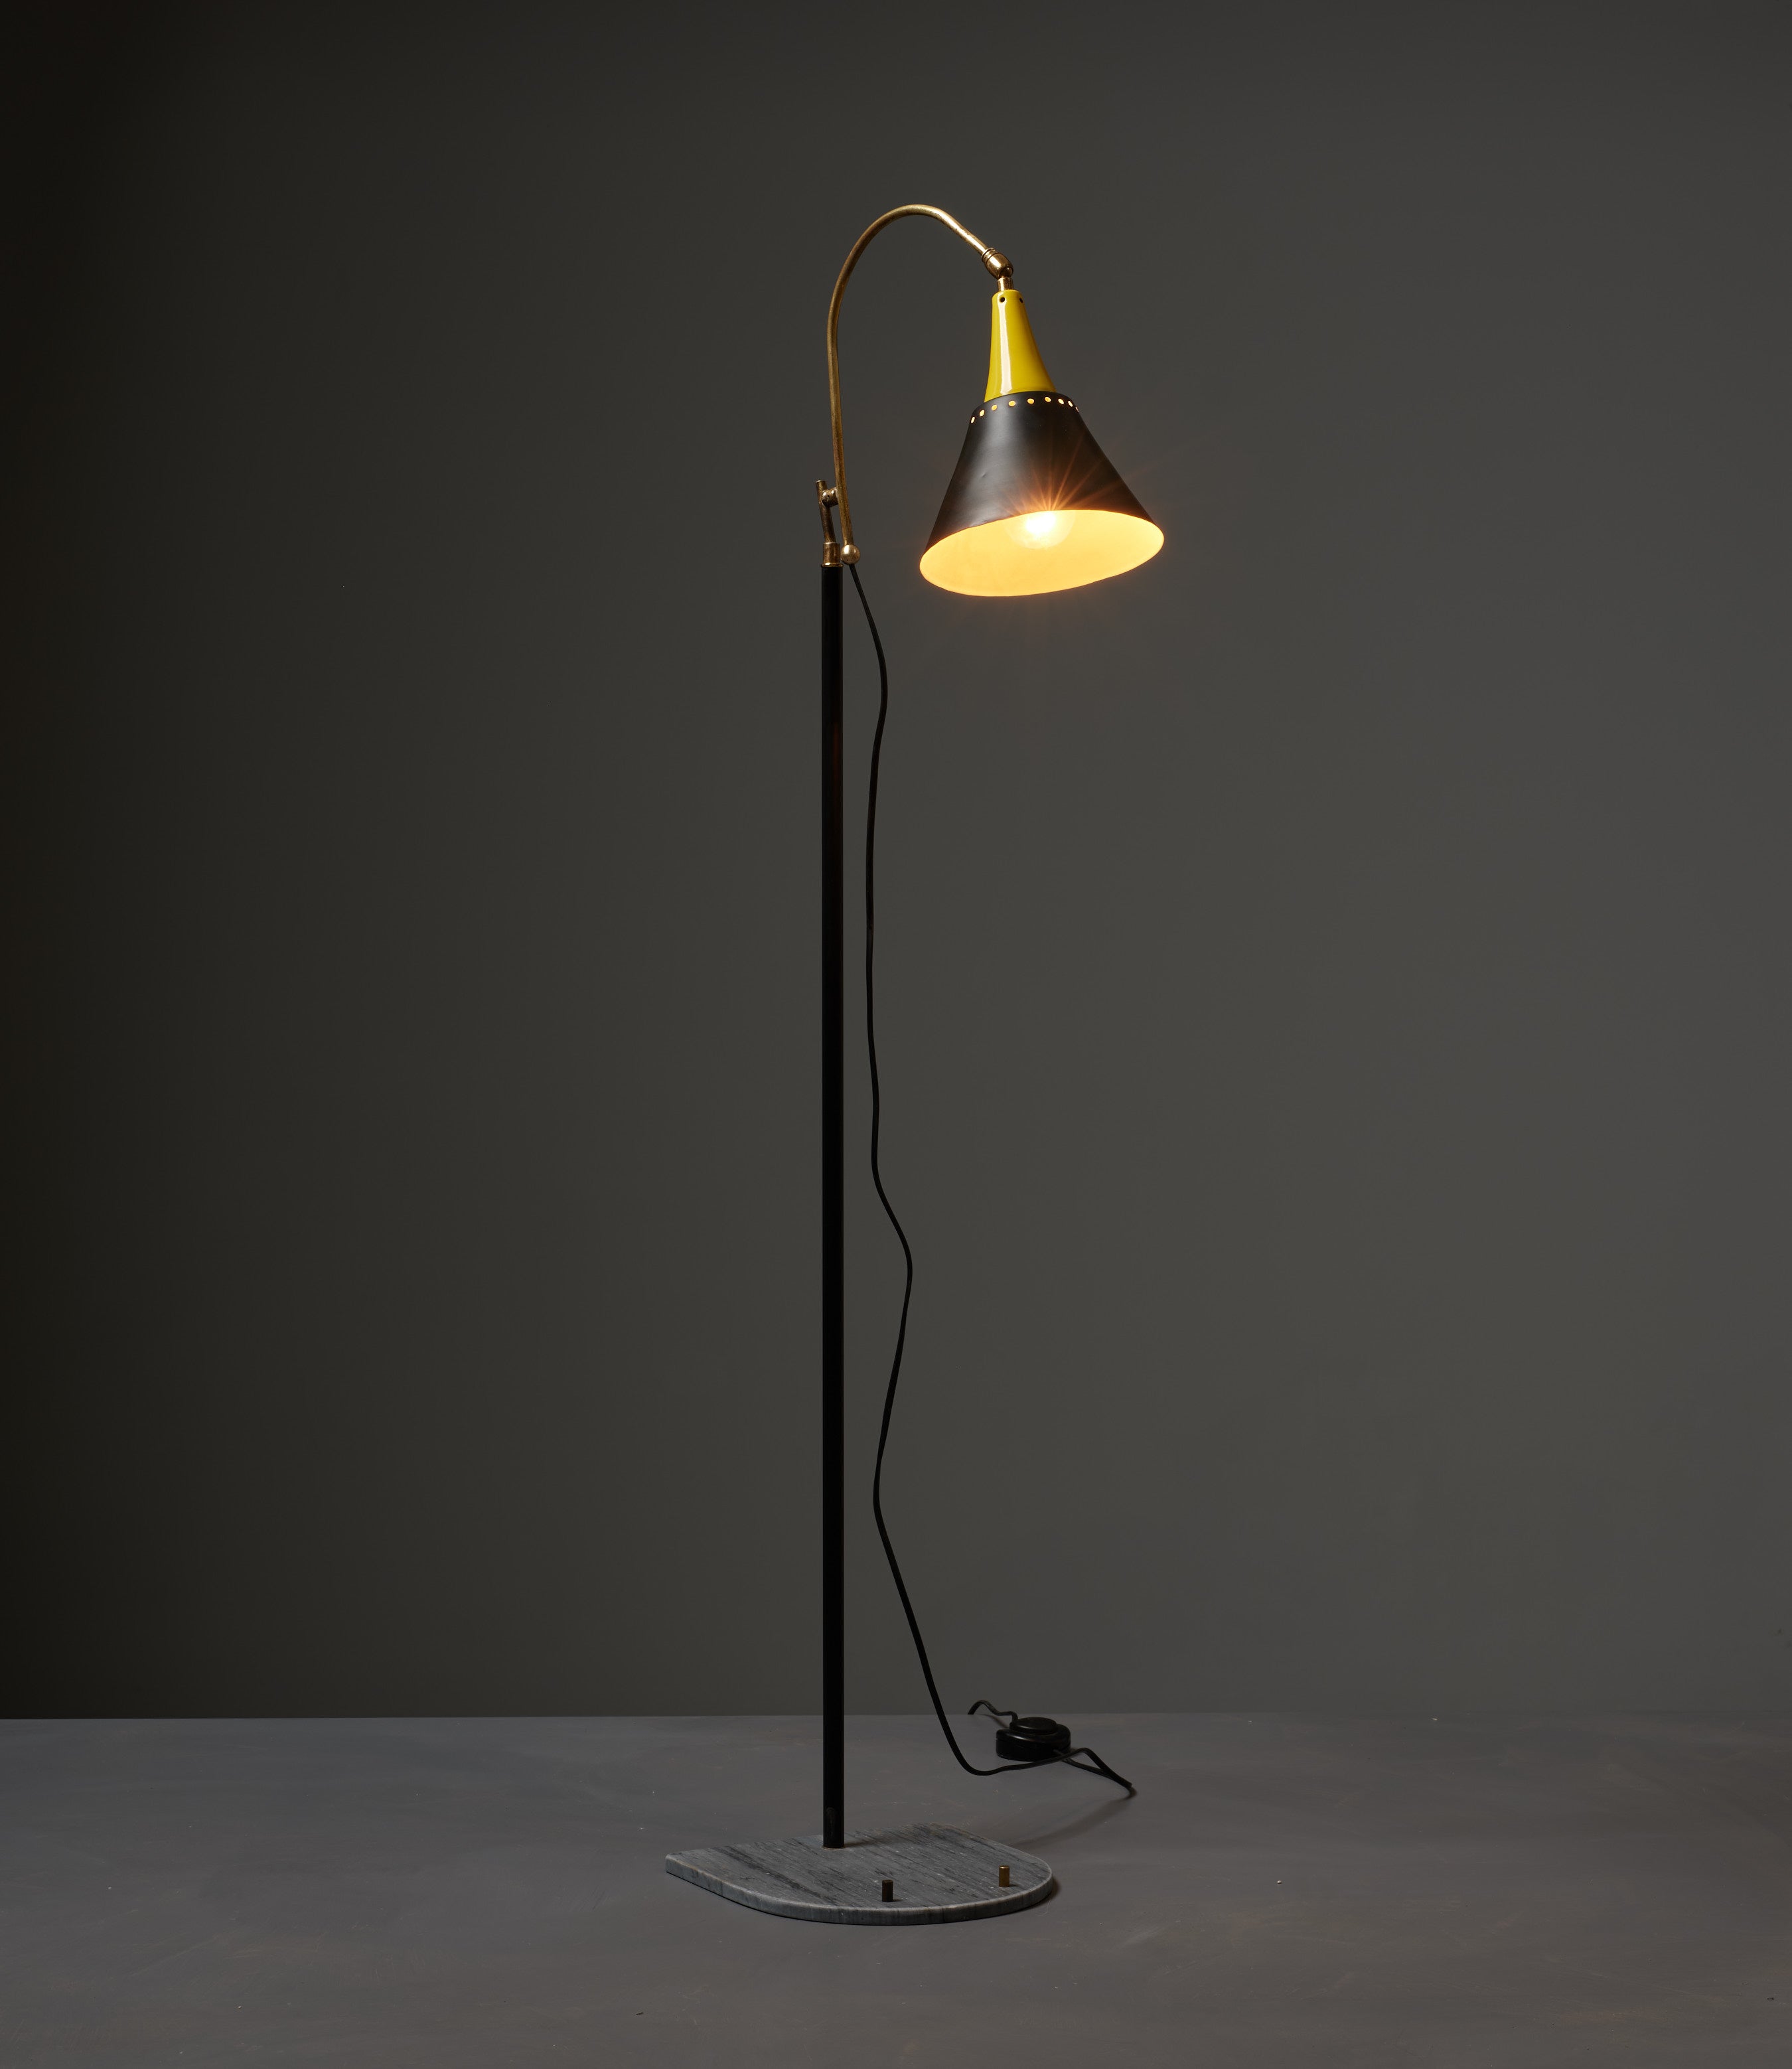 Introducing our exquisite Italian Design Vintage Floor Lamp, reminiscent of the elegant 1950s era. This stunning lamp boasts a sleek black and yellow enamel metal shade and a sturdy black enamel and brass-coated iron stem, perfectly complemented by